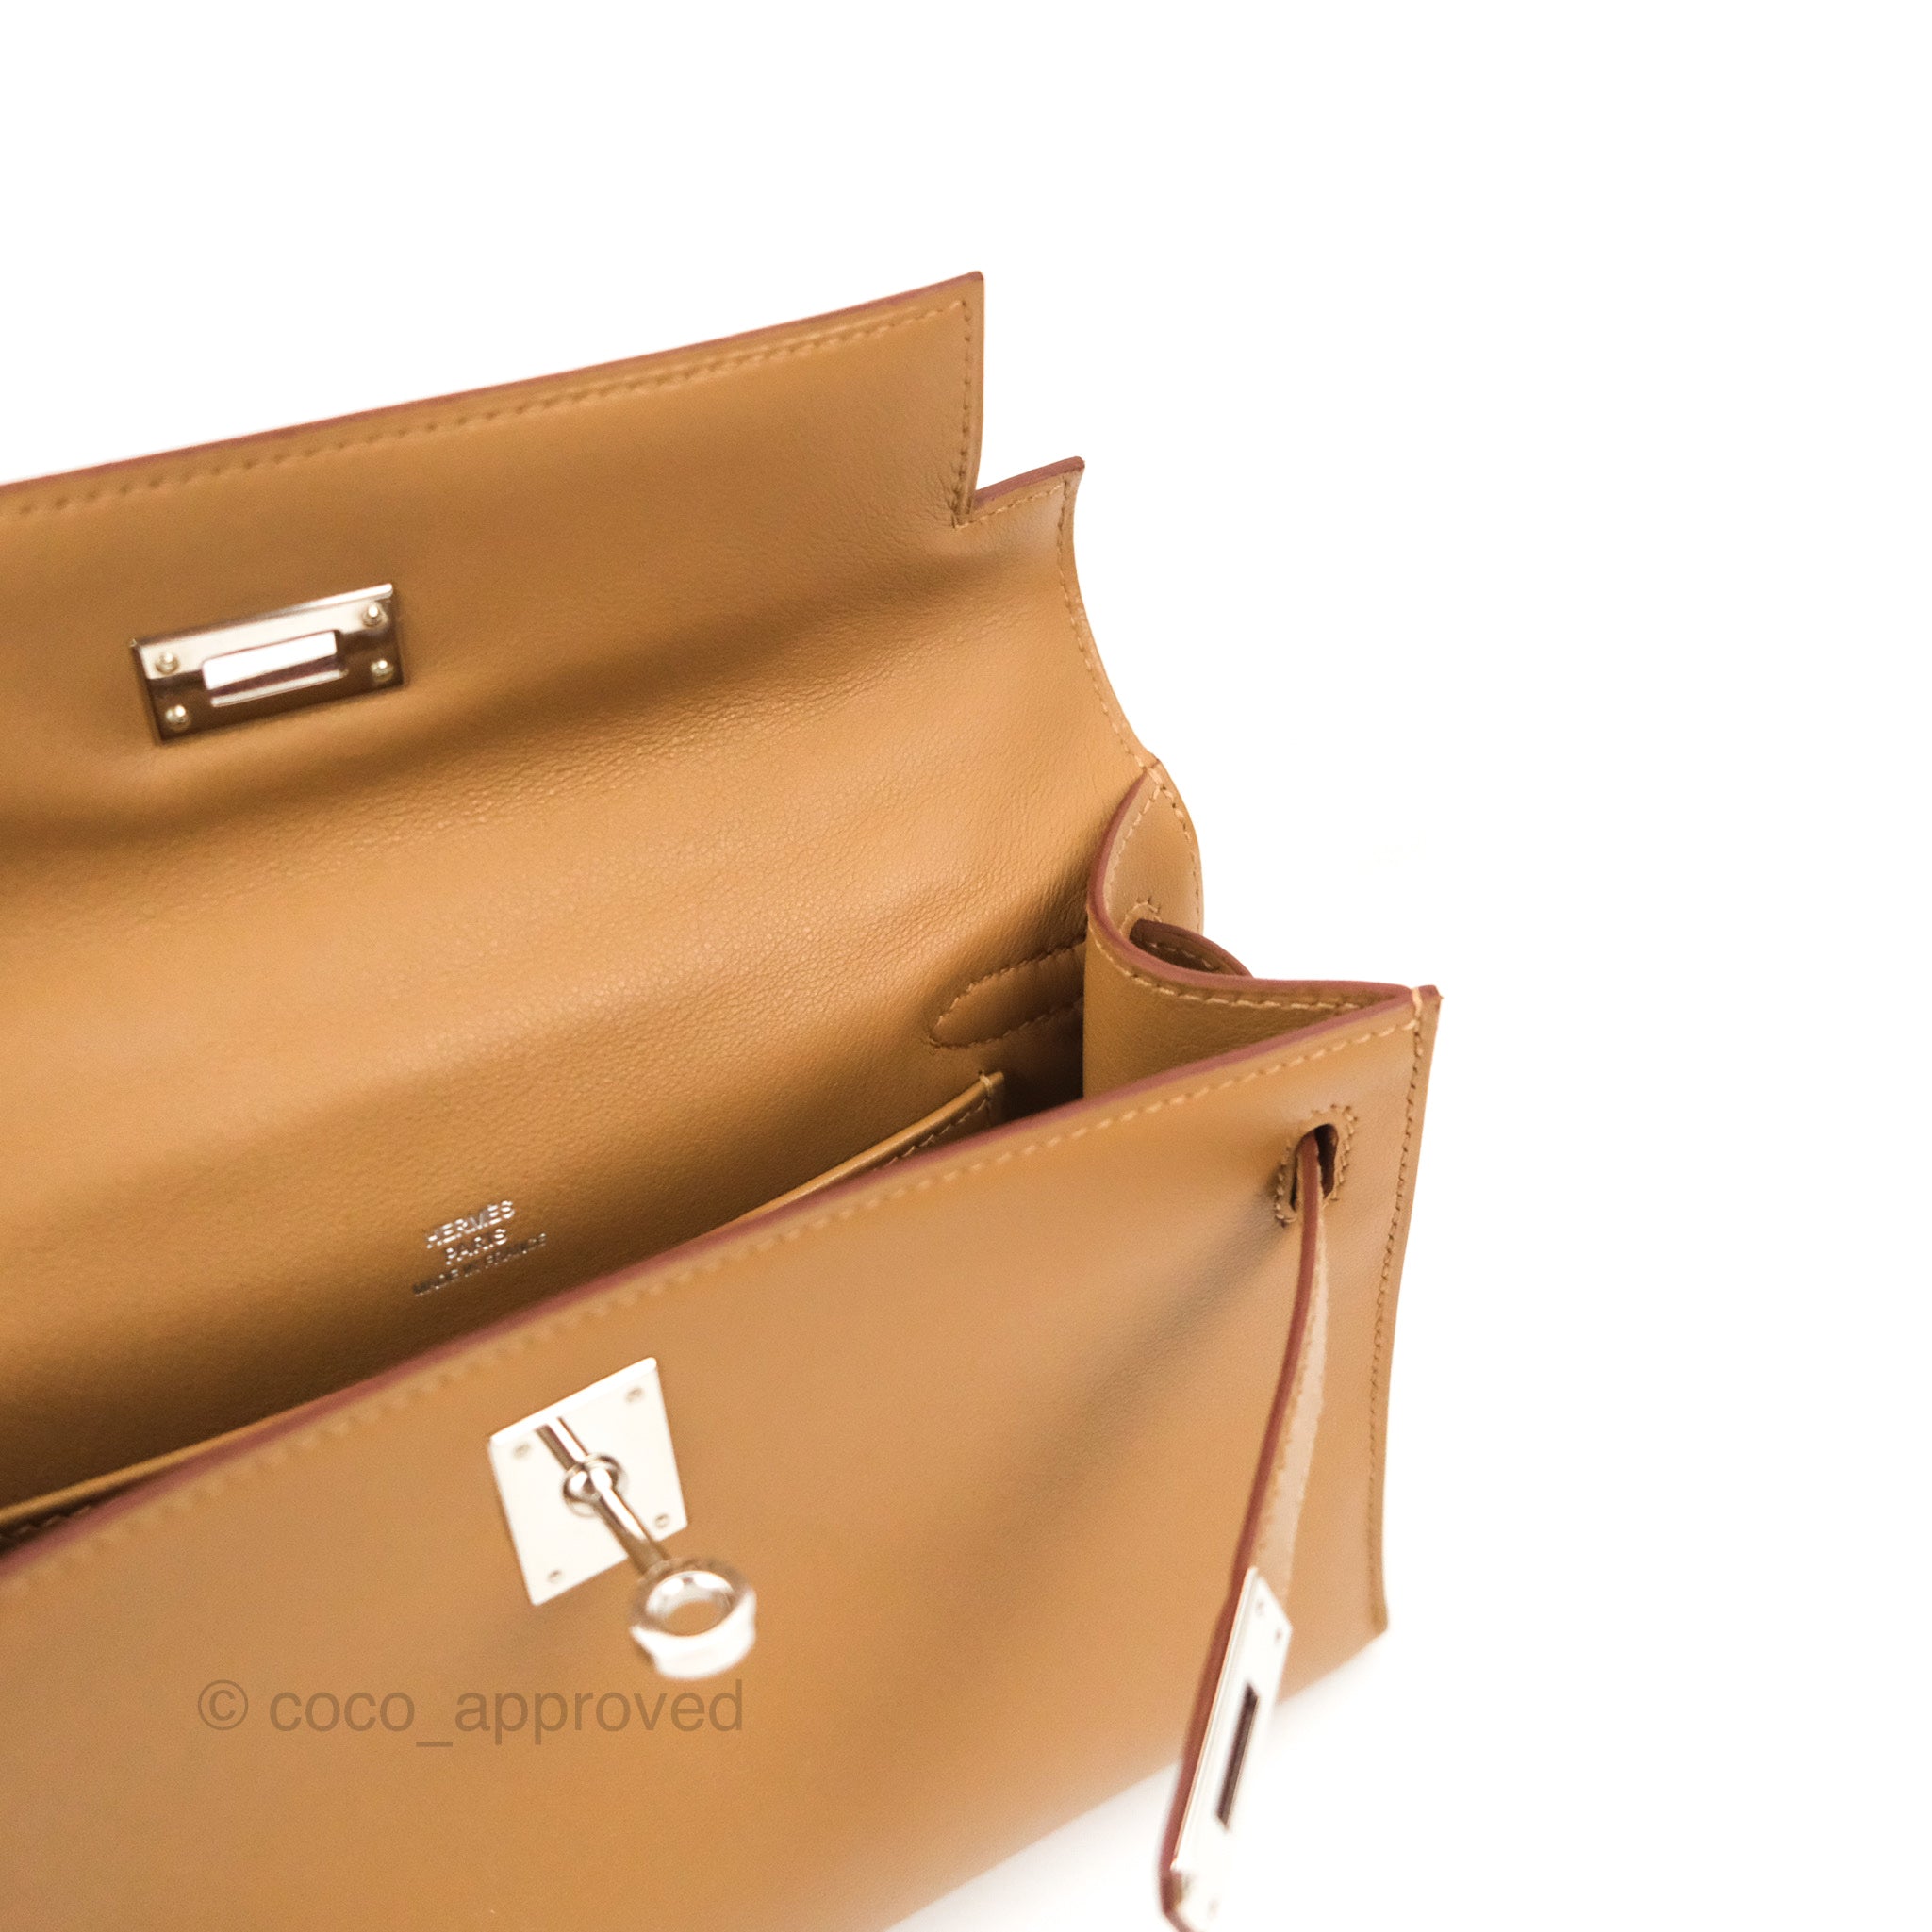 Biscuit Kelly Pochette in Swift Leather with Gold Hardware, 2010